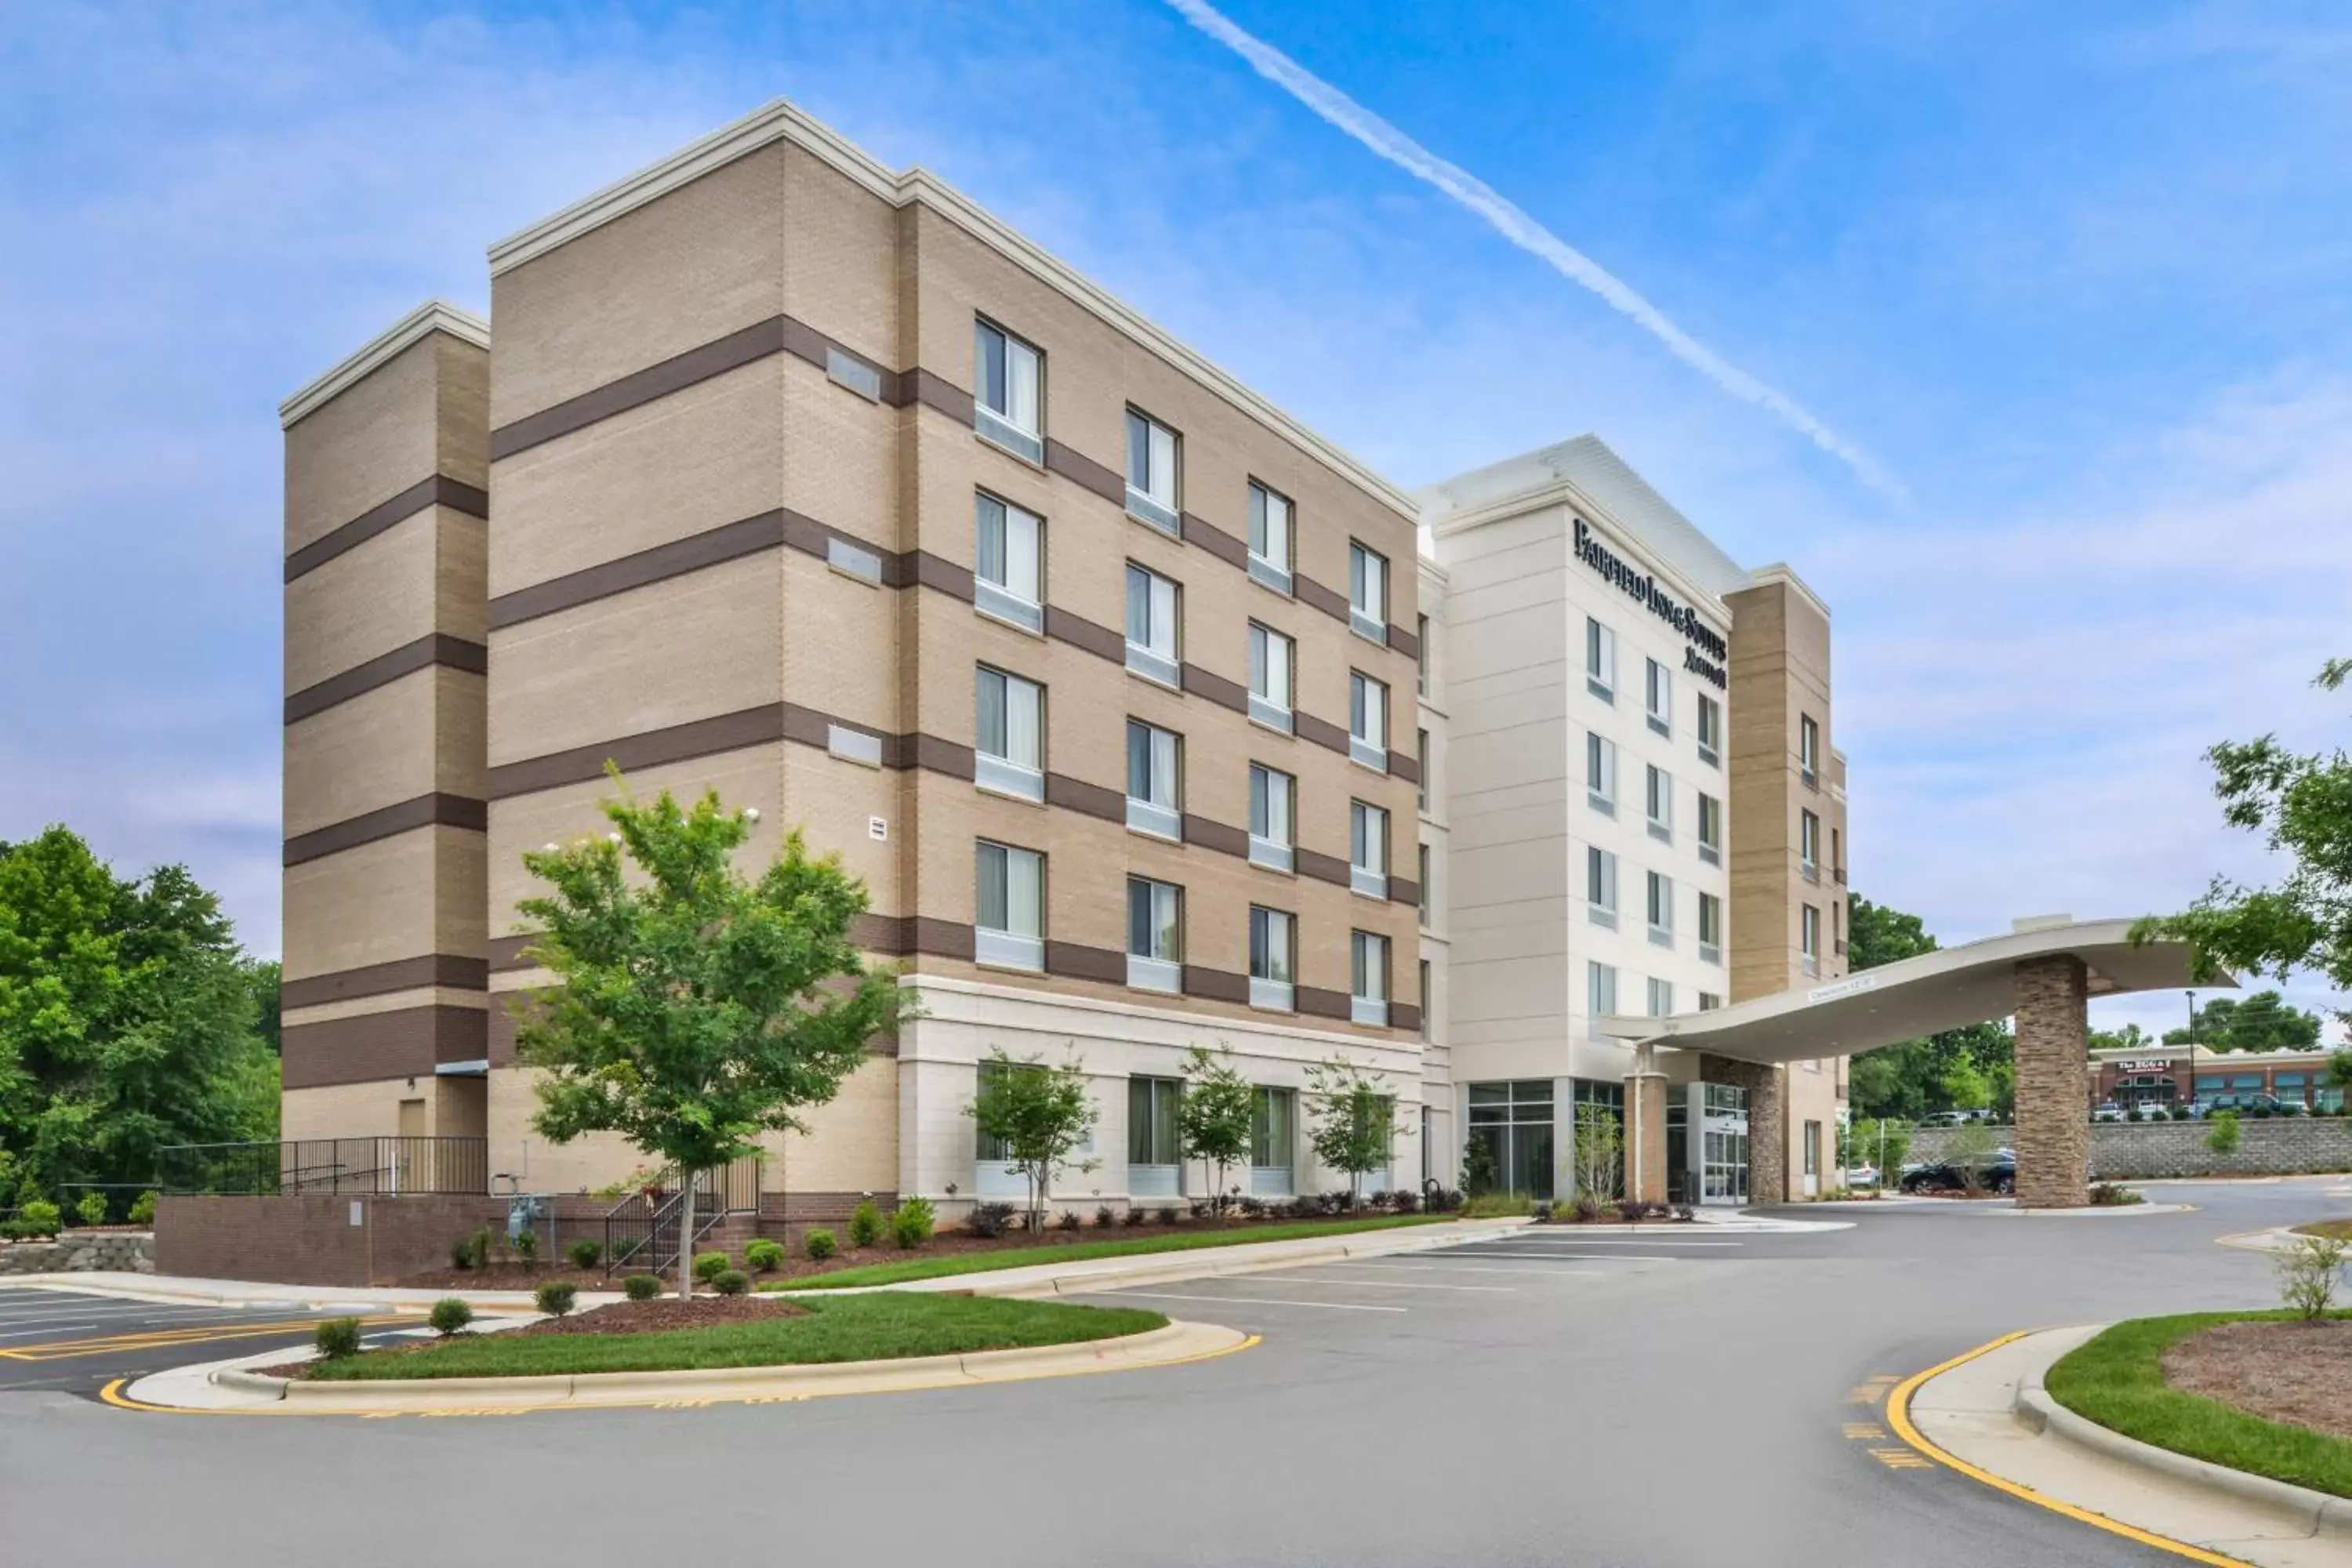 Property Building in Fairfield Inn & Suites by Marriott Raleigh Cary